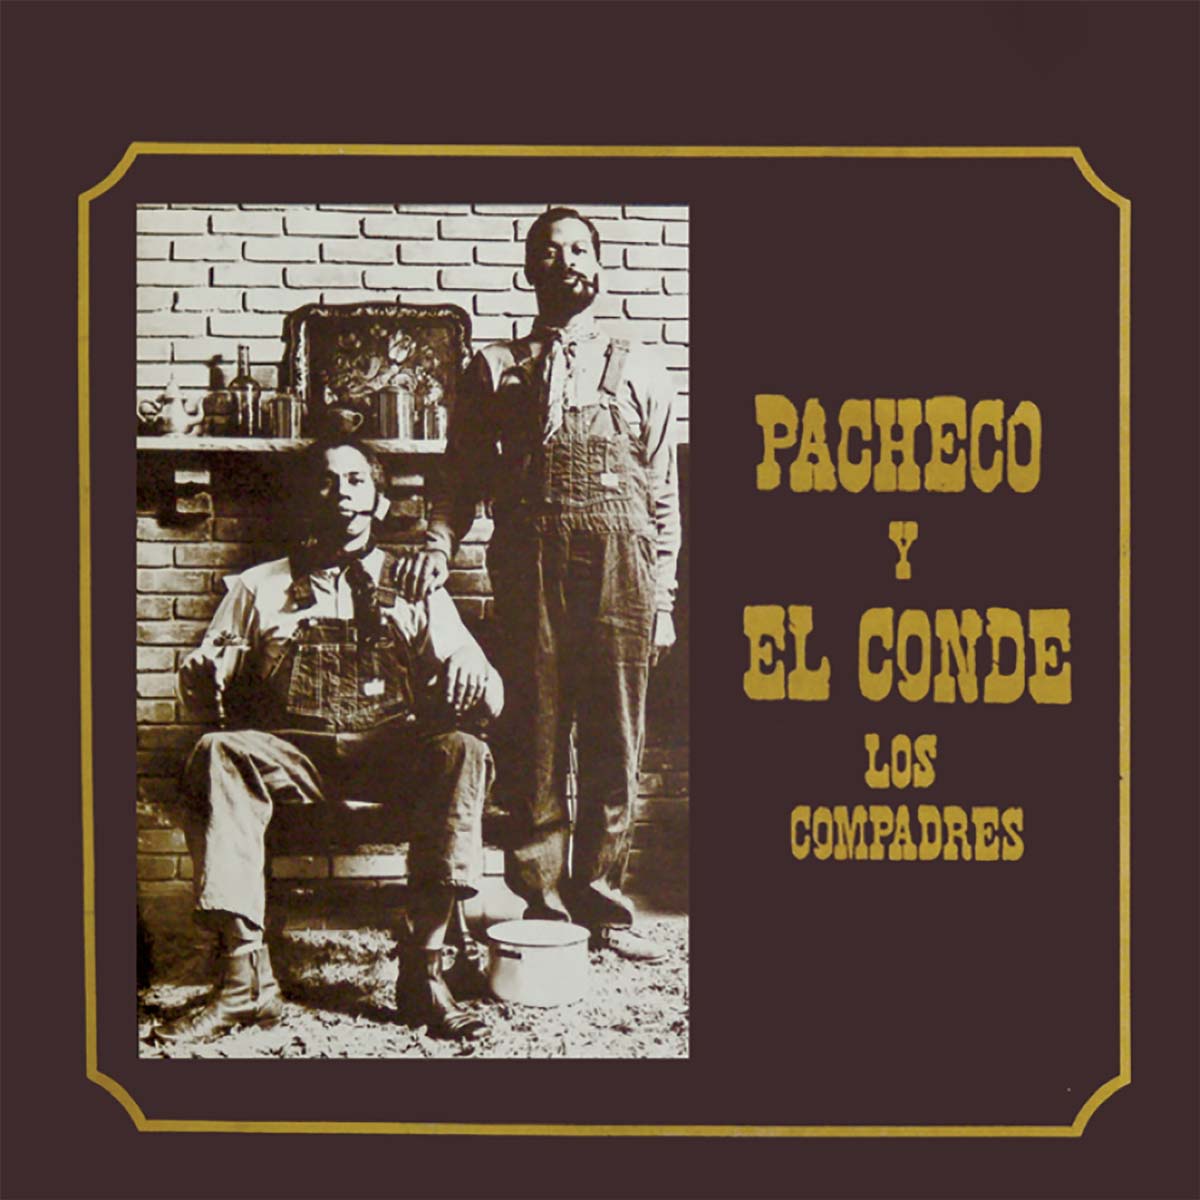 Featured Image for “LOS COMPADRES”